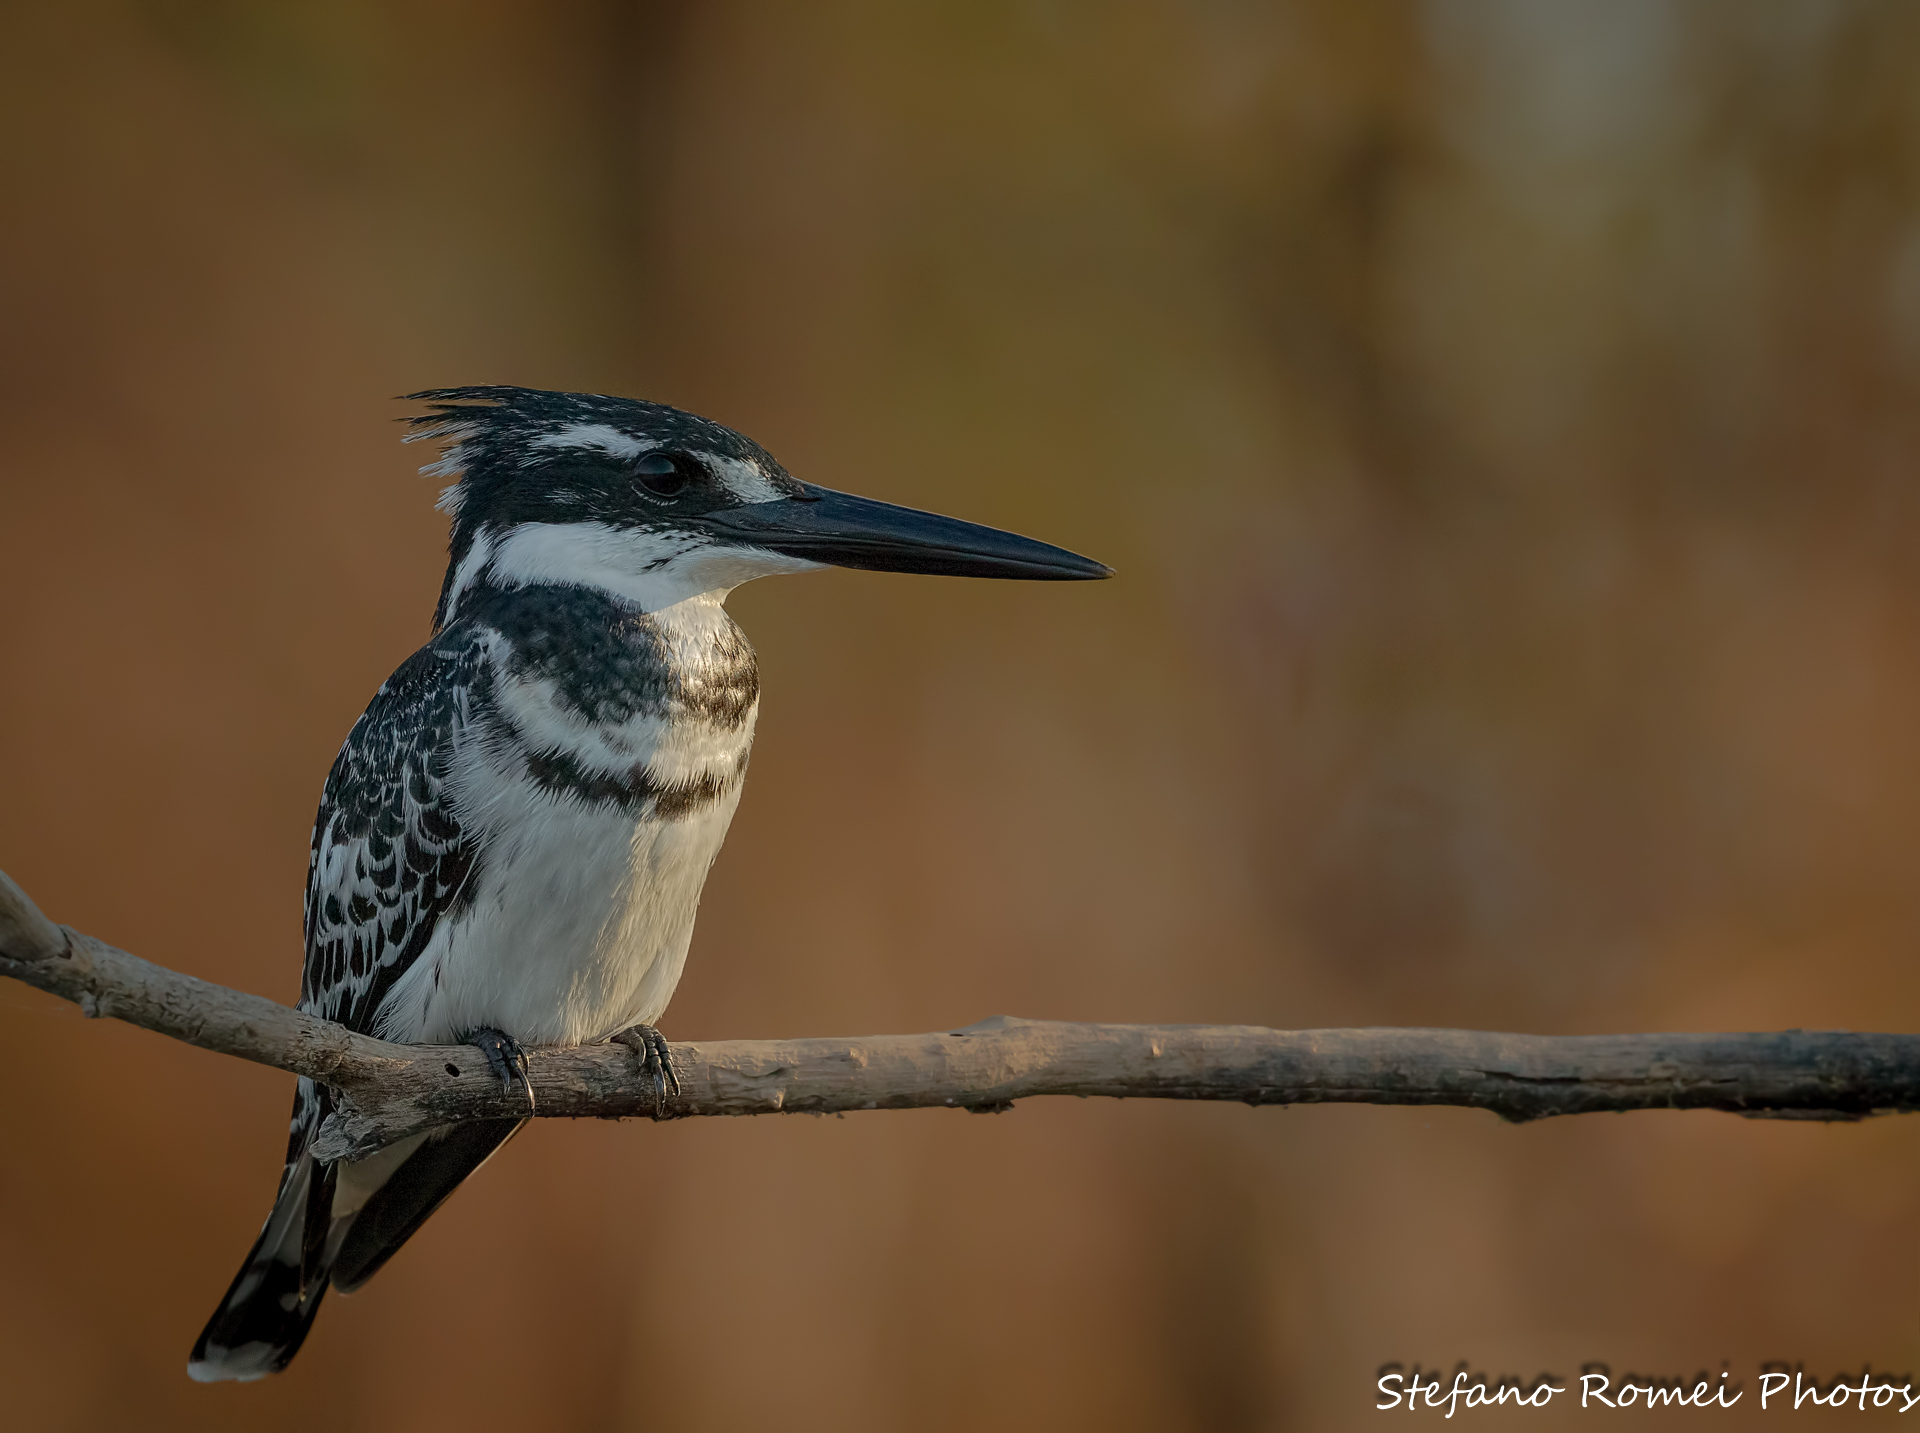 pied kingfisher, a clandestine coming?...